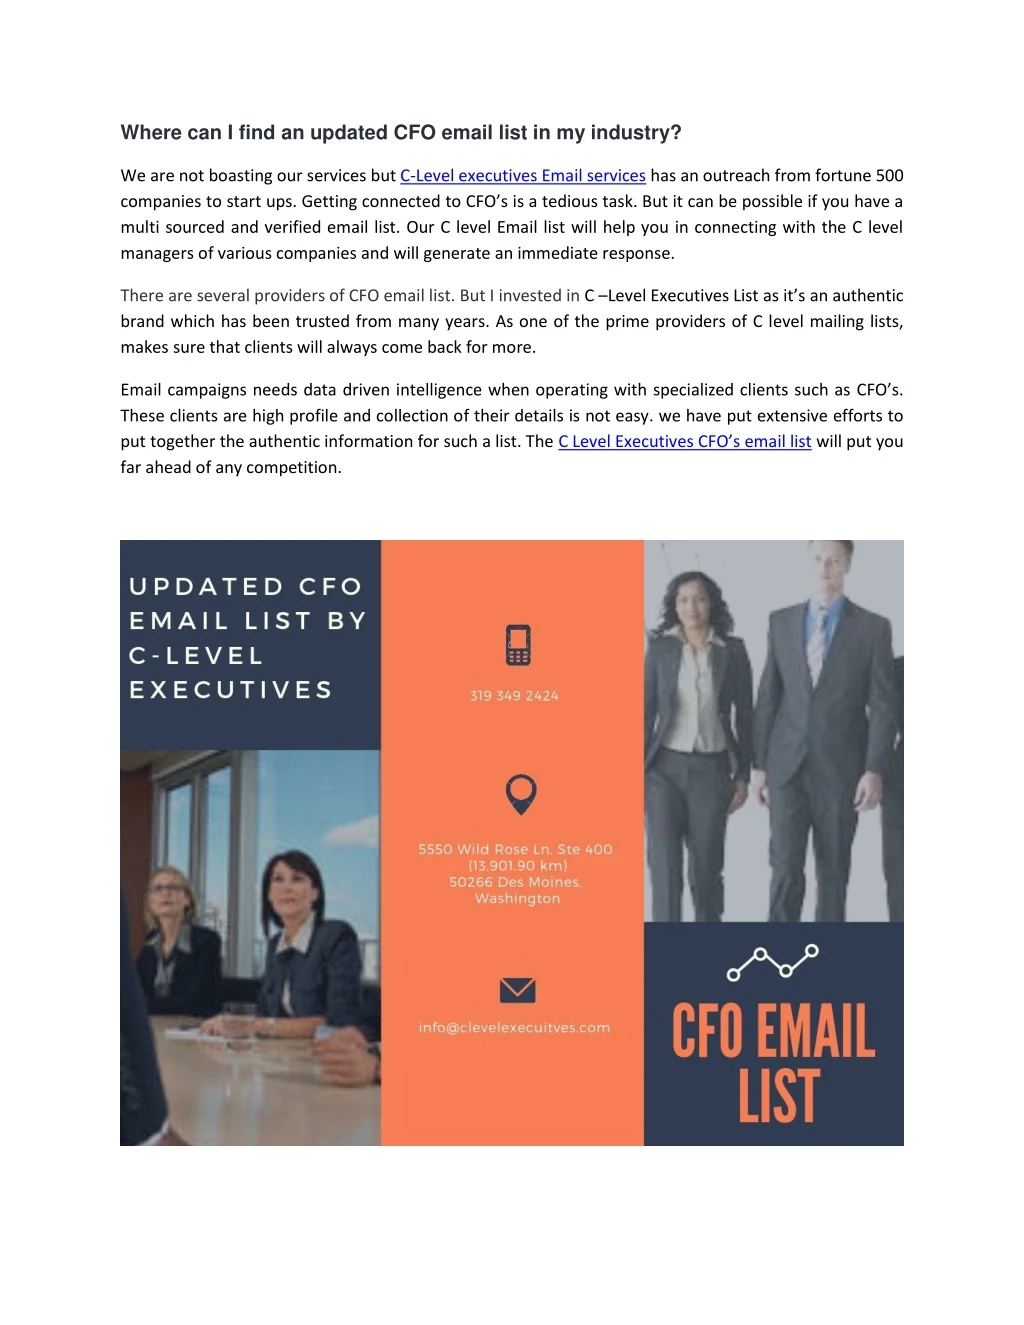 where can i find an updated cfo email list